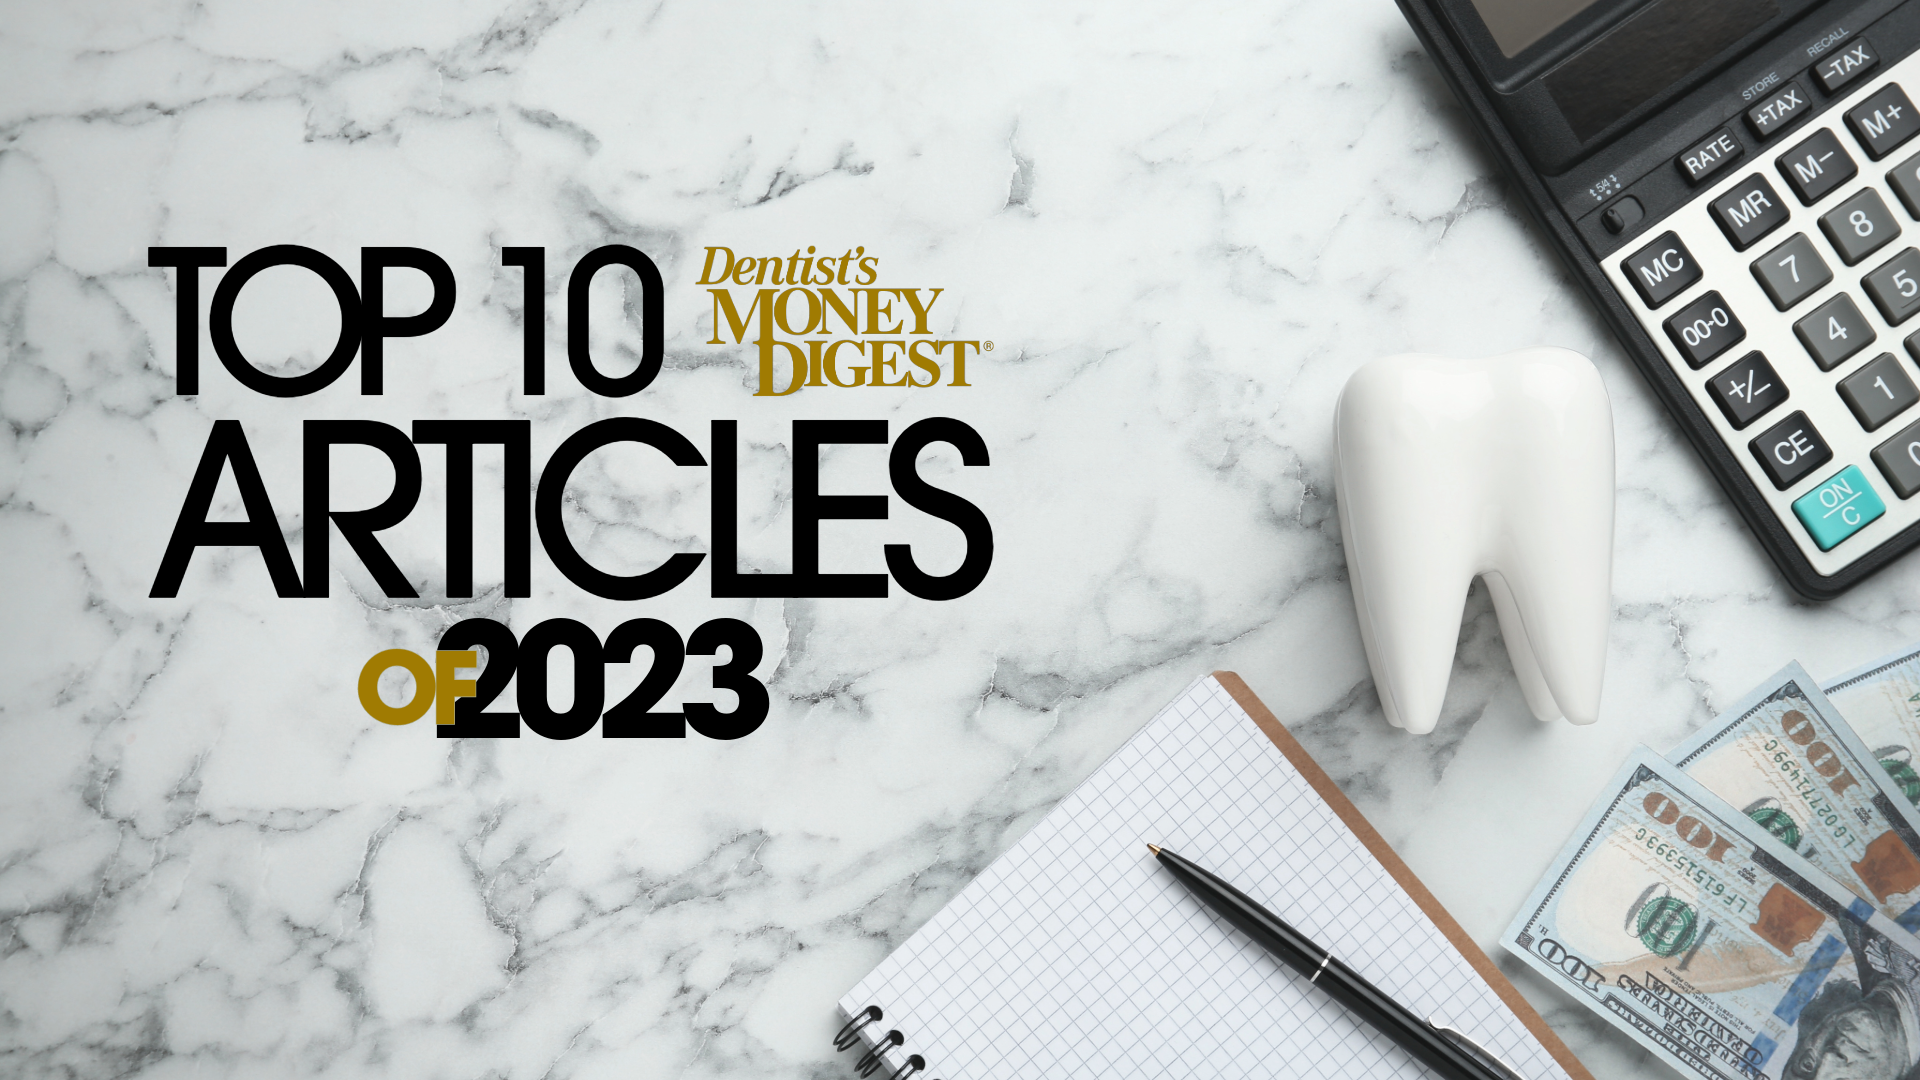 Top 10 Dentist's Money Digest Articles of 2023